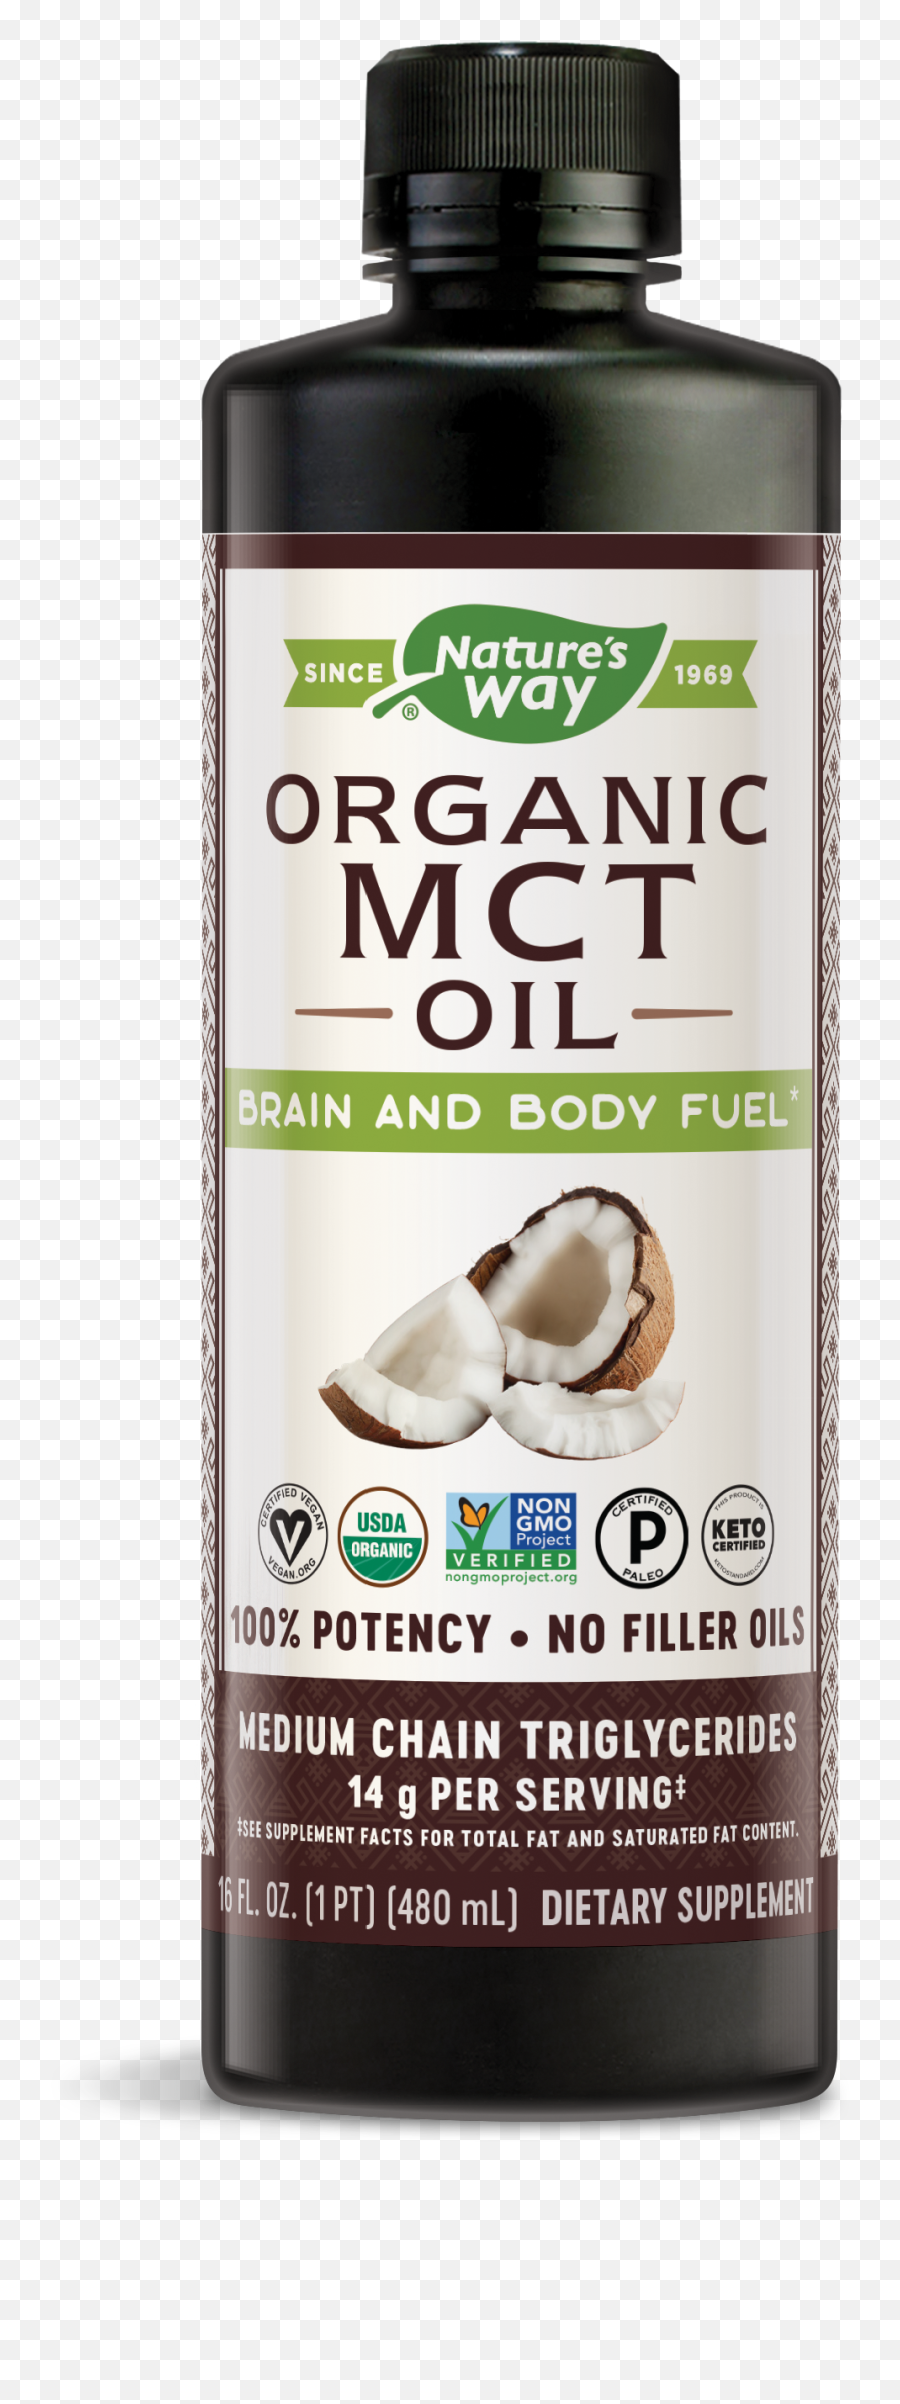 Natures Way Organic Mct Oil Brain - Way Mct Oil From Coconut Emoji,Magnifying-glass Emojis Suits Usa Clue